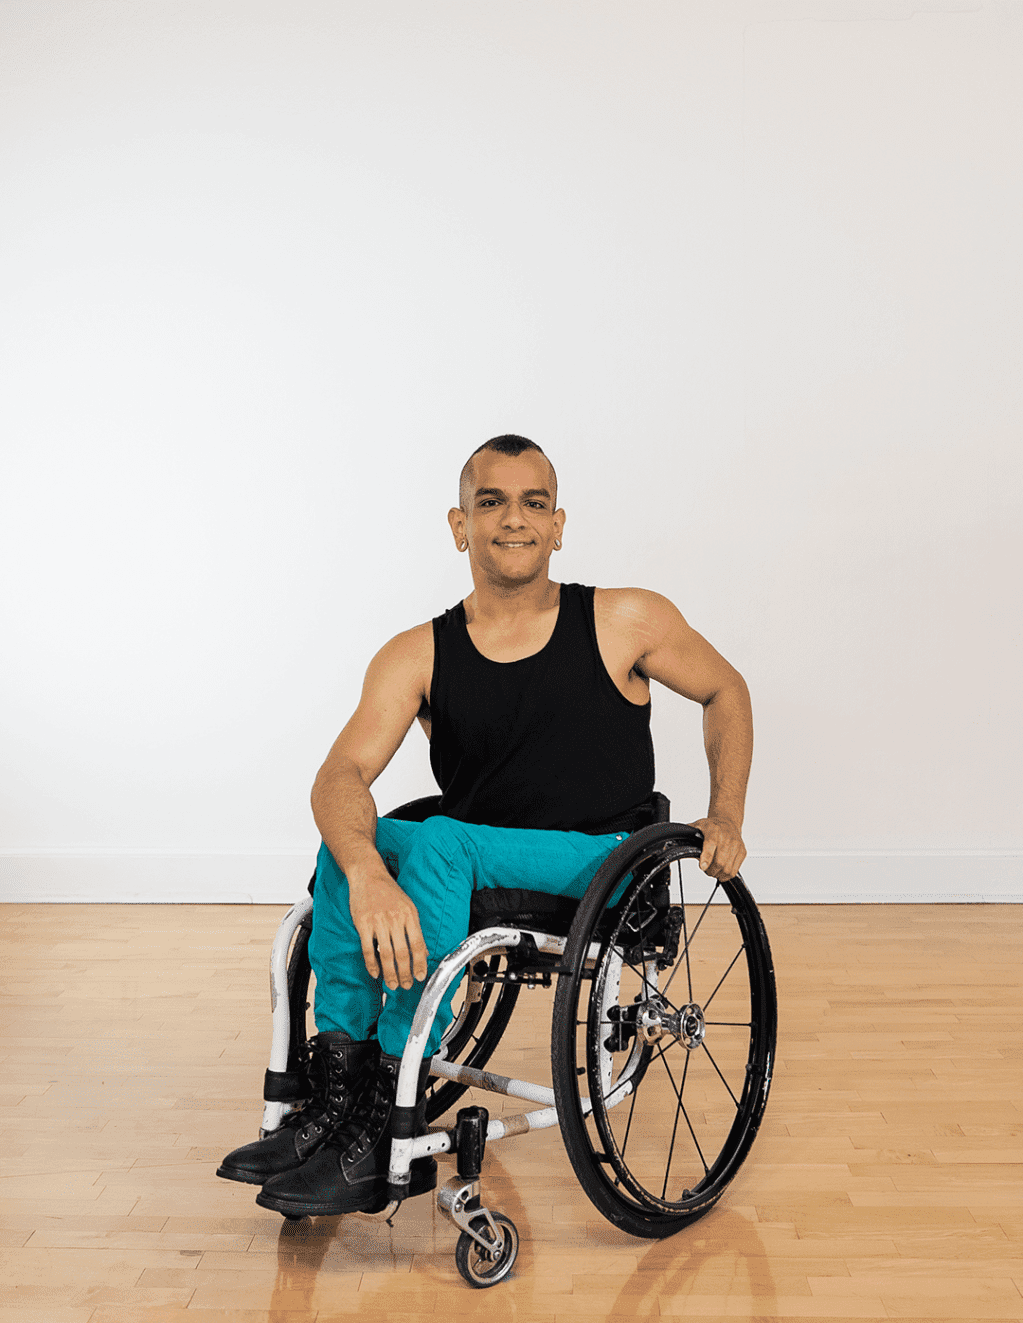 JanpiStar is a Latinx wheelchair user with light brown skin, long arms and a beautiful smile. They are wearing a black tank top, blue turquoise pants and black boots.